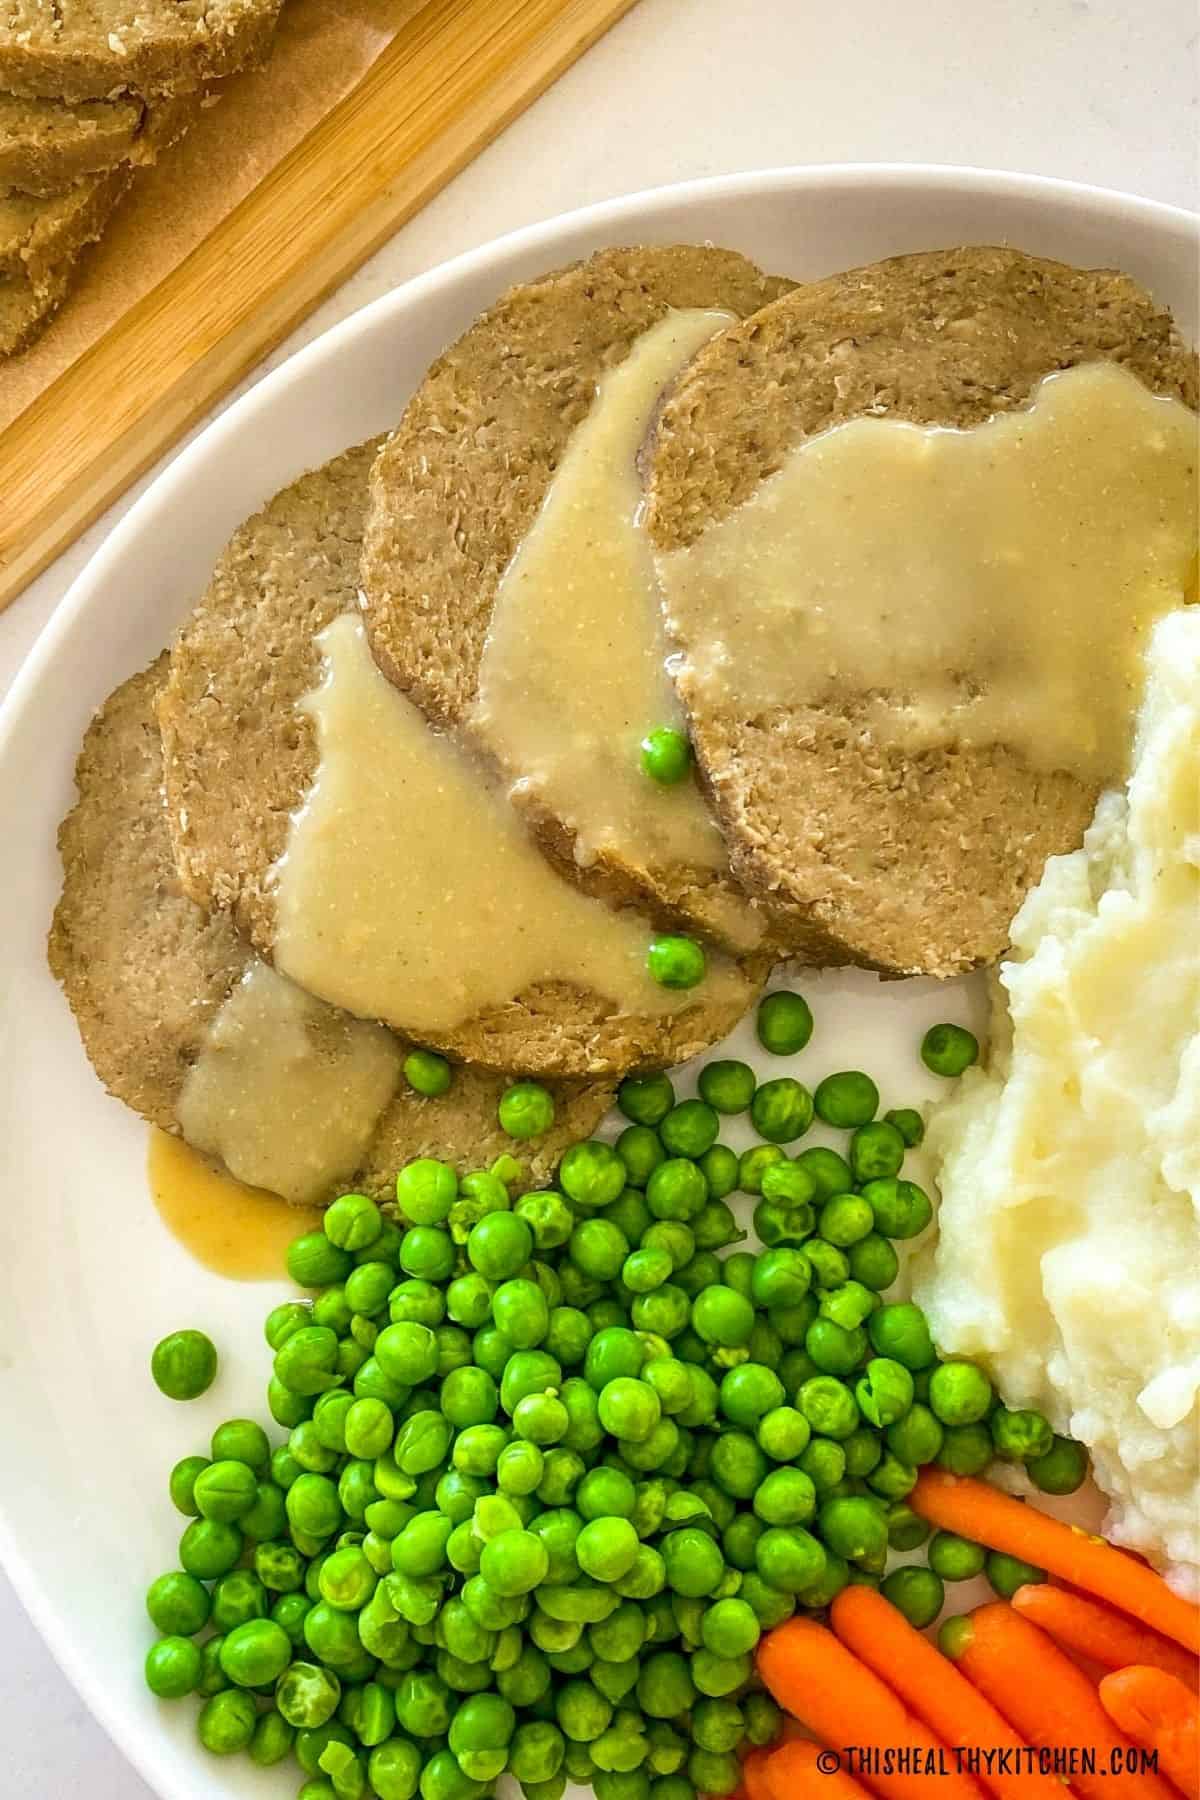 Sliced vegan roast on a plate with mashed potatoes, peas and carrots.